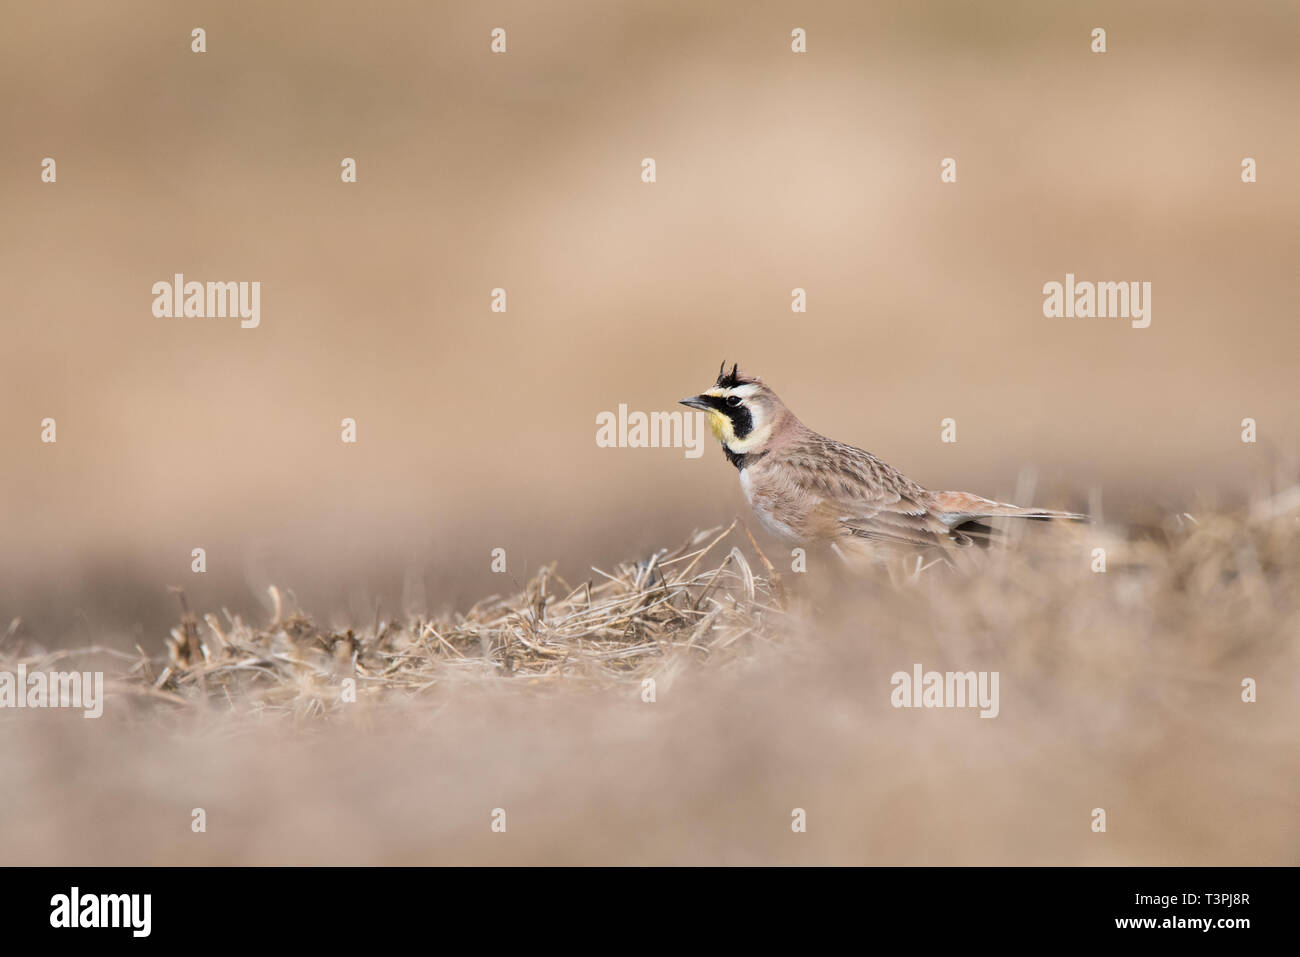 A Horned Lark forages for a meal in the section of Toronto, Ontario's Downsview Park being used to re-create a Tallgrass Prairie ecosystem. Stock Photo